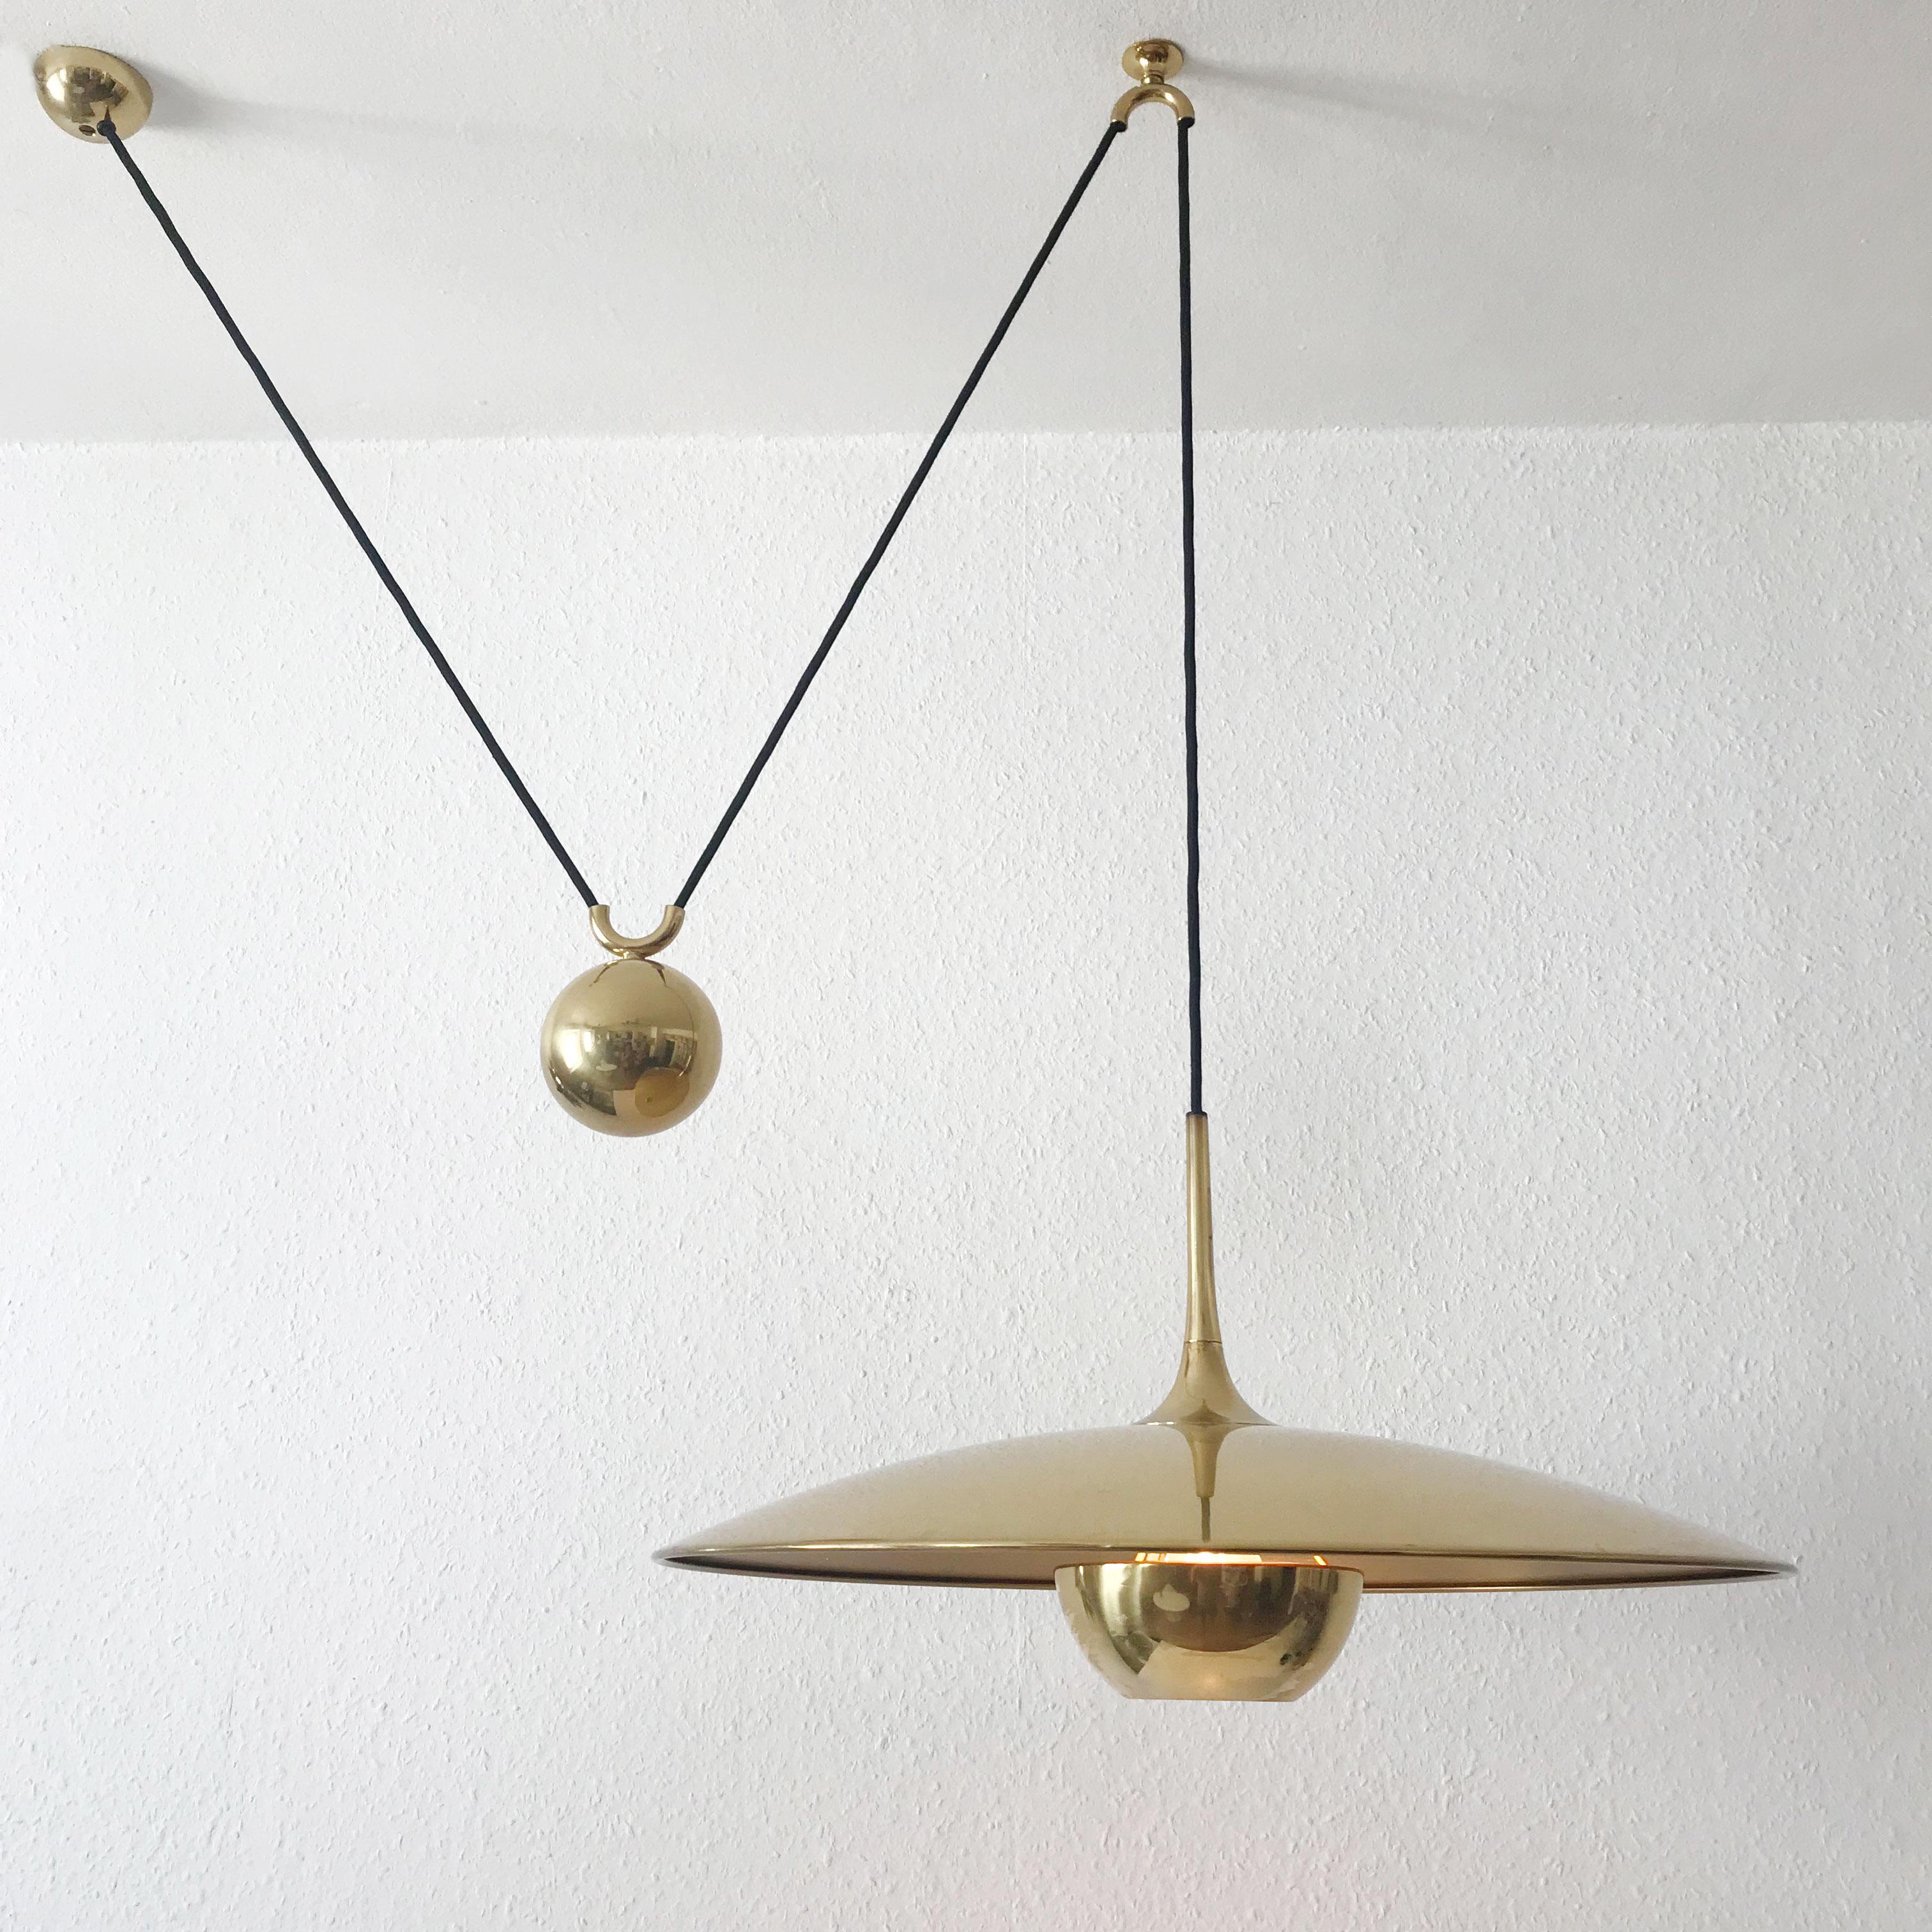 Elegant and large Mid-Century Modern counterweight pendant lamp Onos 55 by Florian Schulz, Germany, 1980s. Executed in polished brass.

The lamp needs one E27 Edison screw fit bulb, is wired. It runs both on 110 / 230 Volt.
Adjustable total